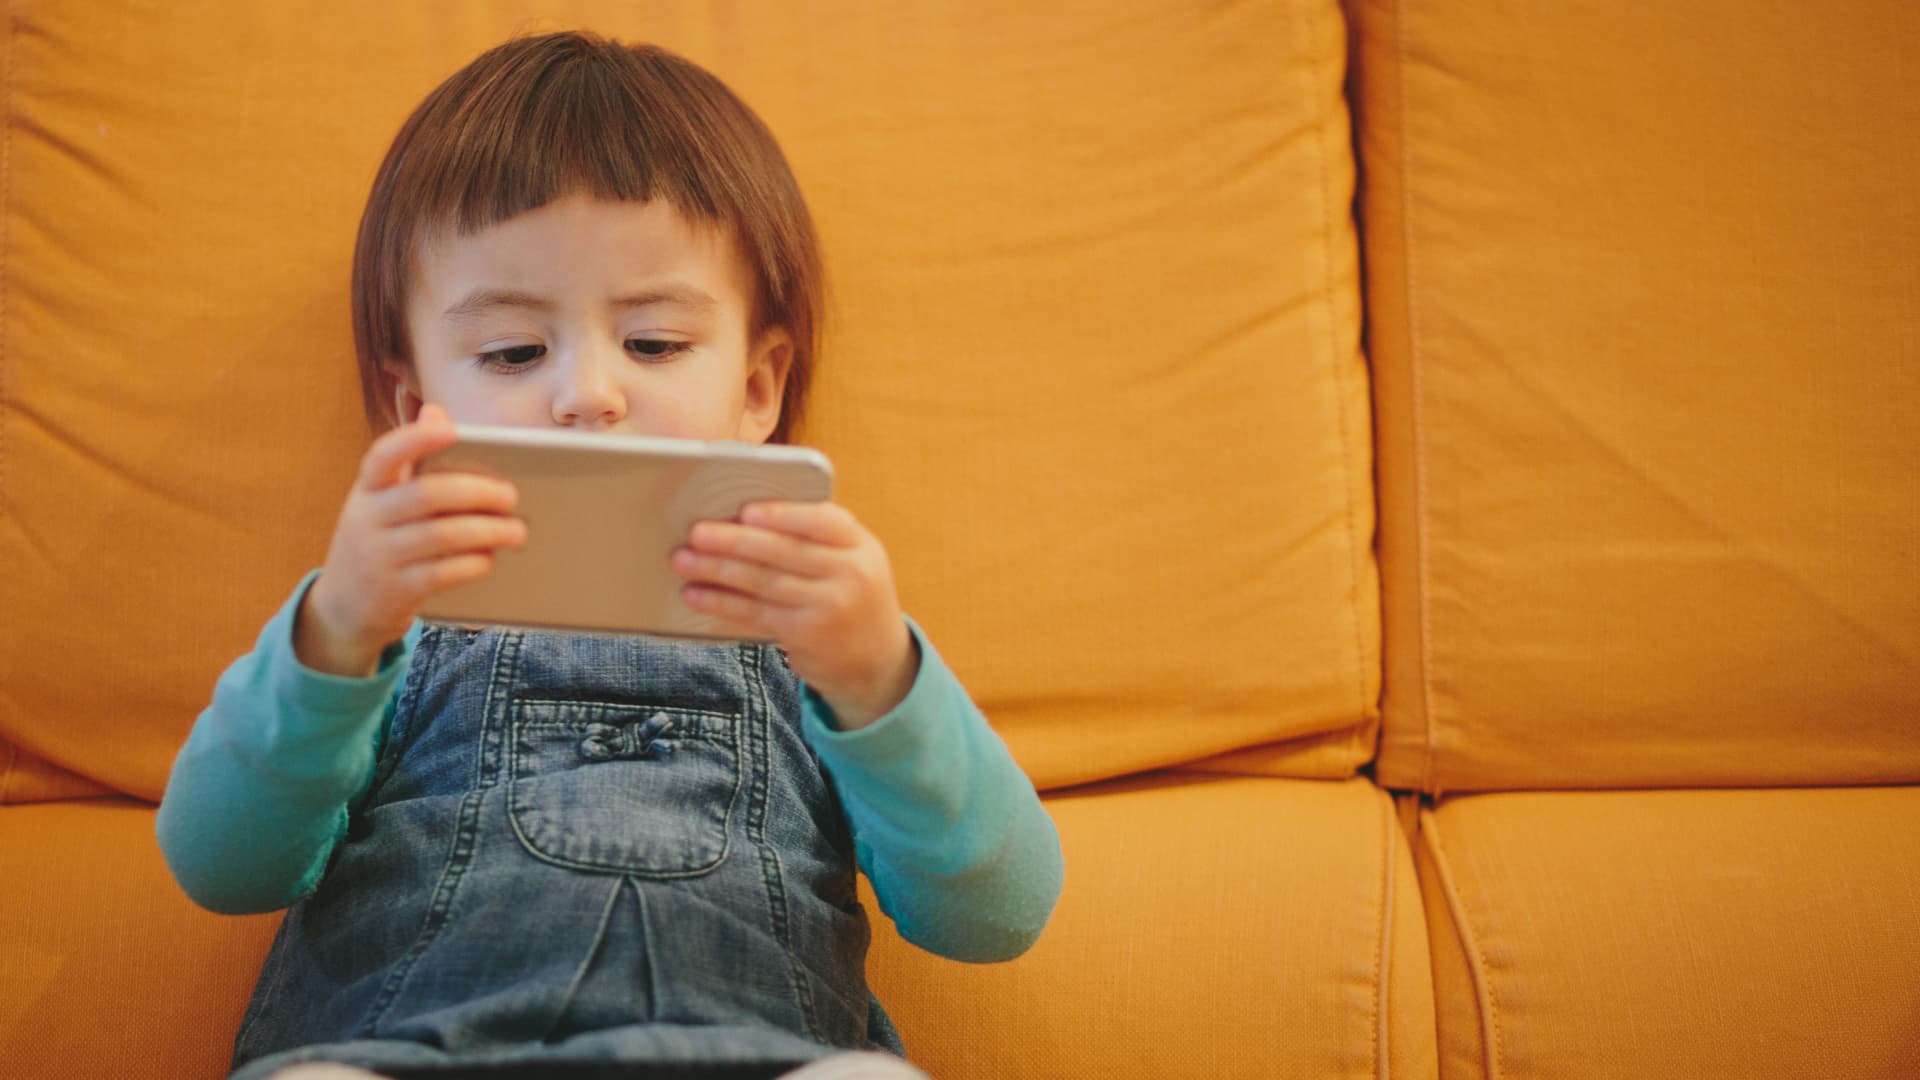 Parents of successful kids don’t worry about screen time, expert says—they teach these 3 skills instead